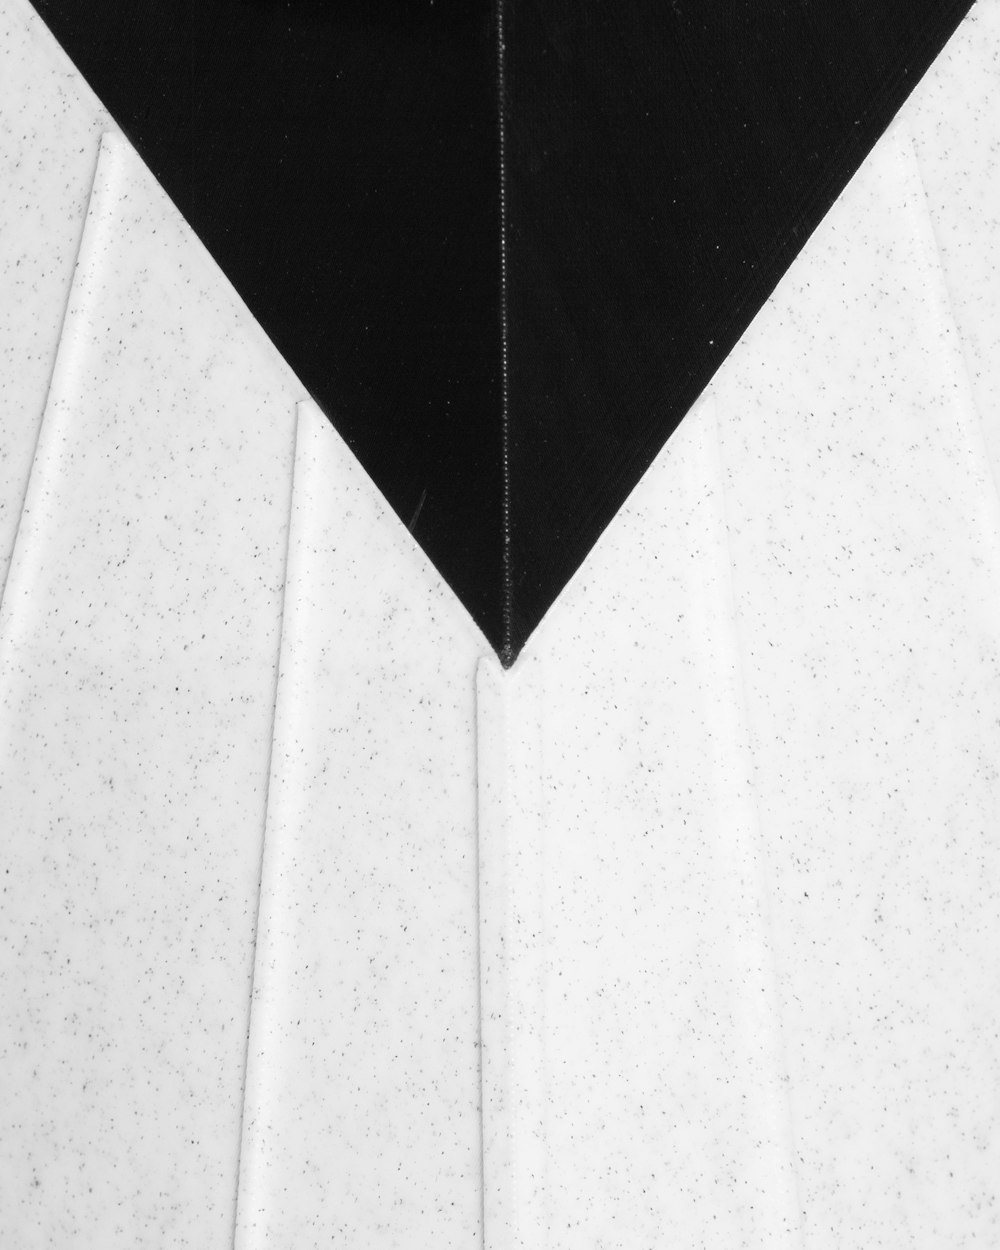 a black and white photo of a black and white triangle